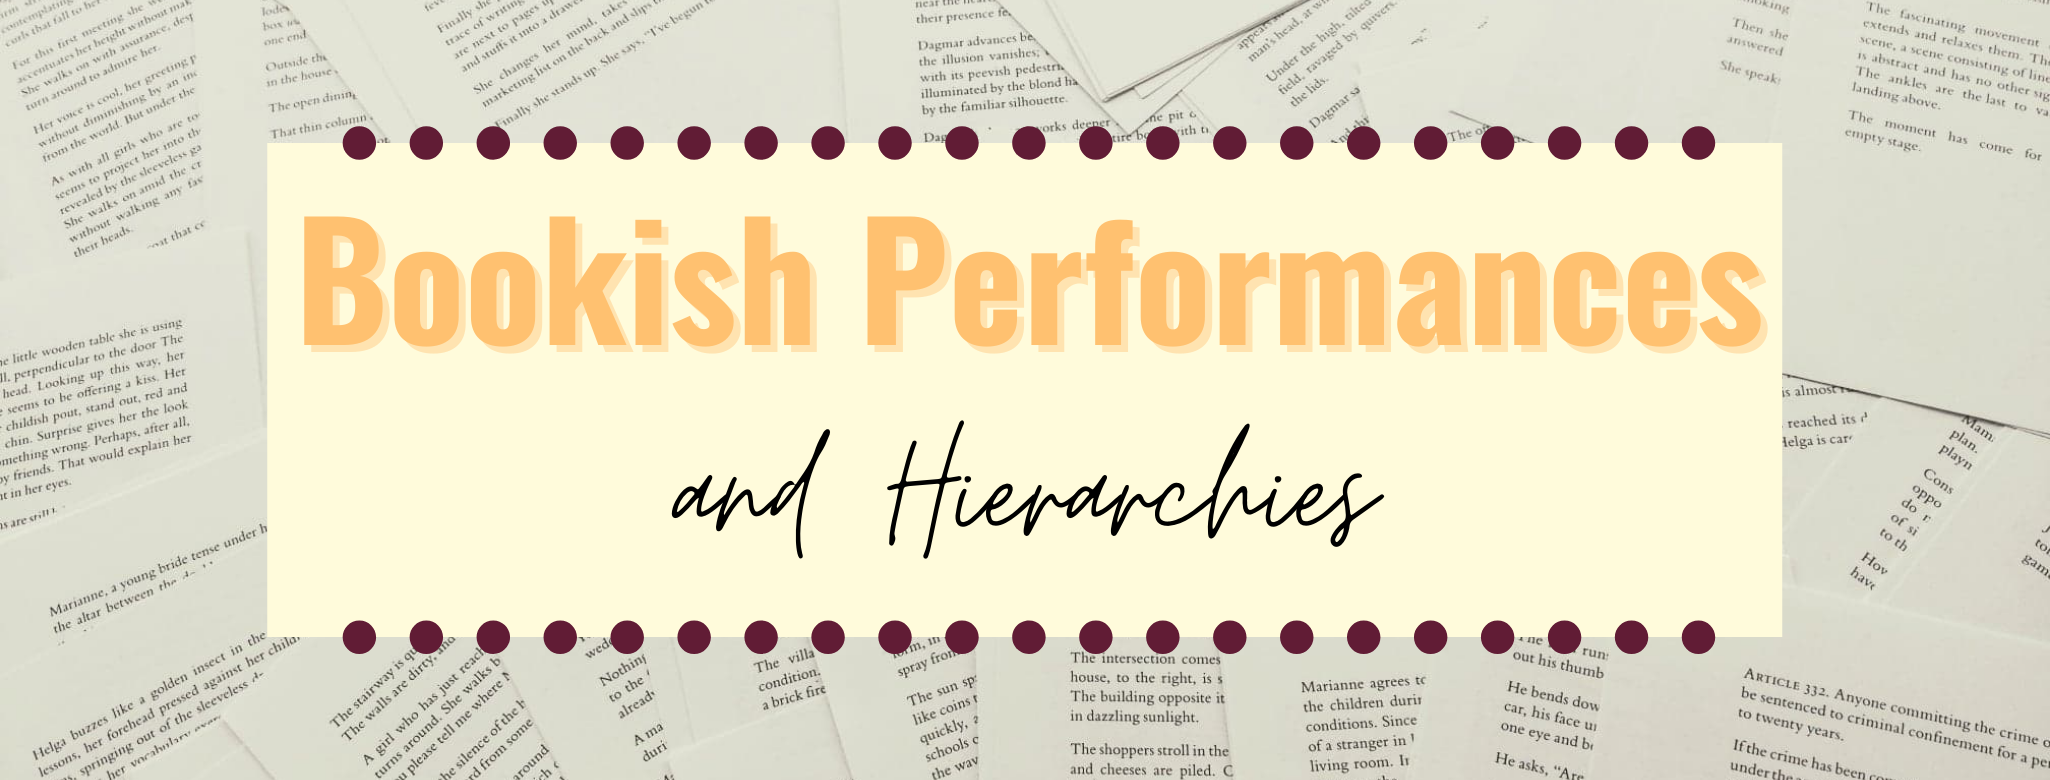 Bookish Performances and Hierarchies Banner